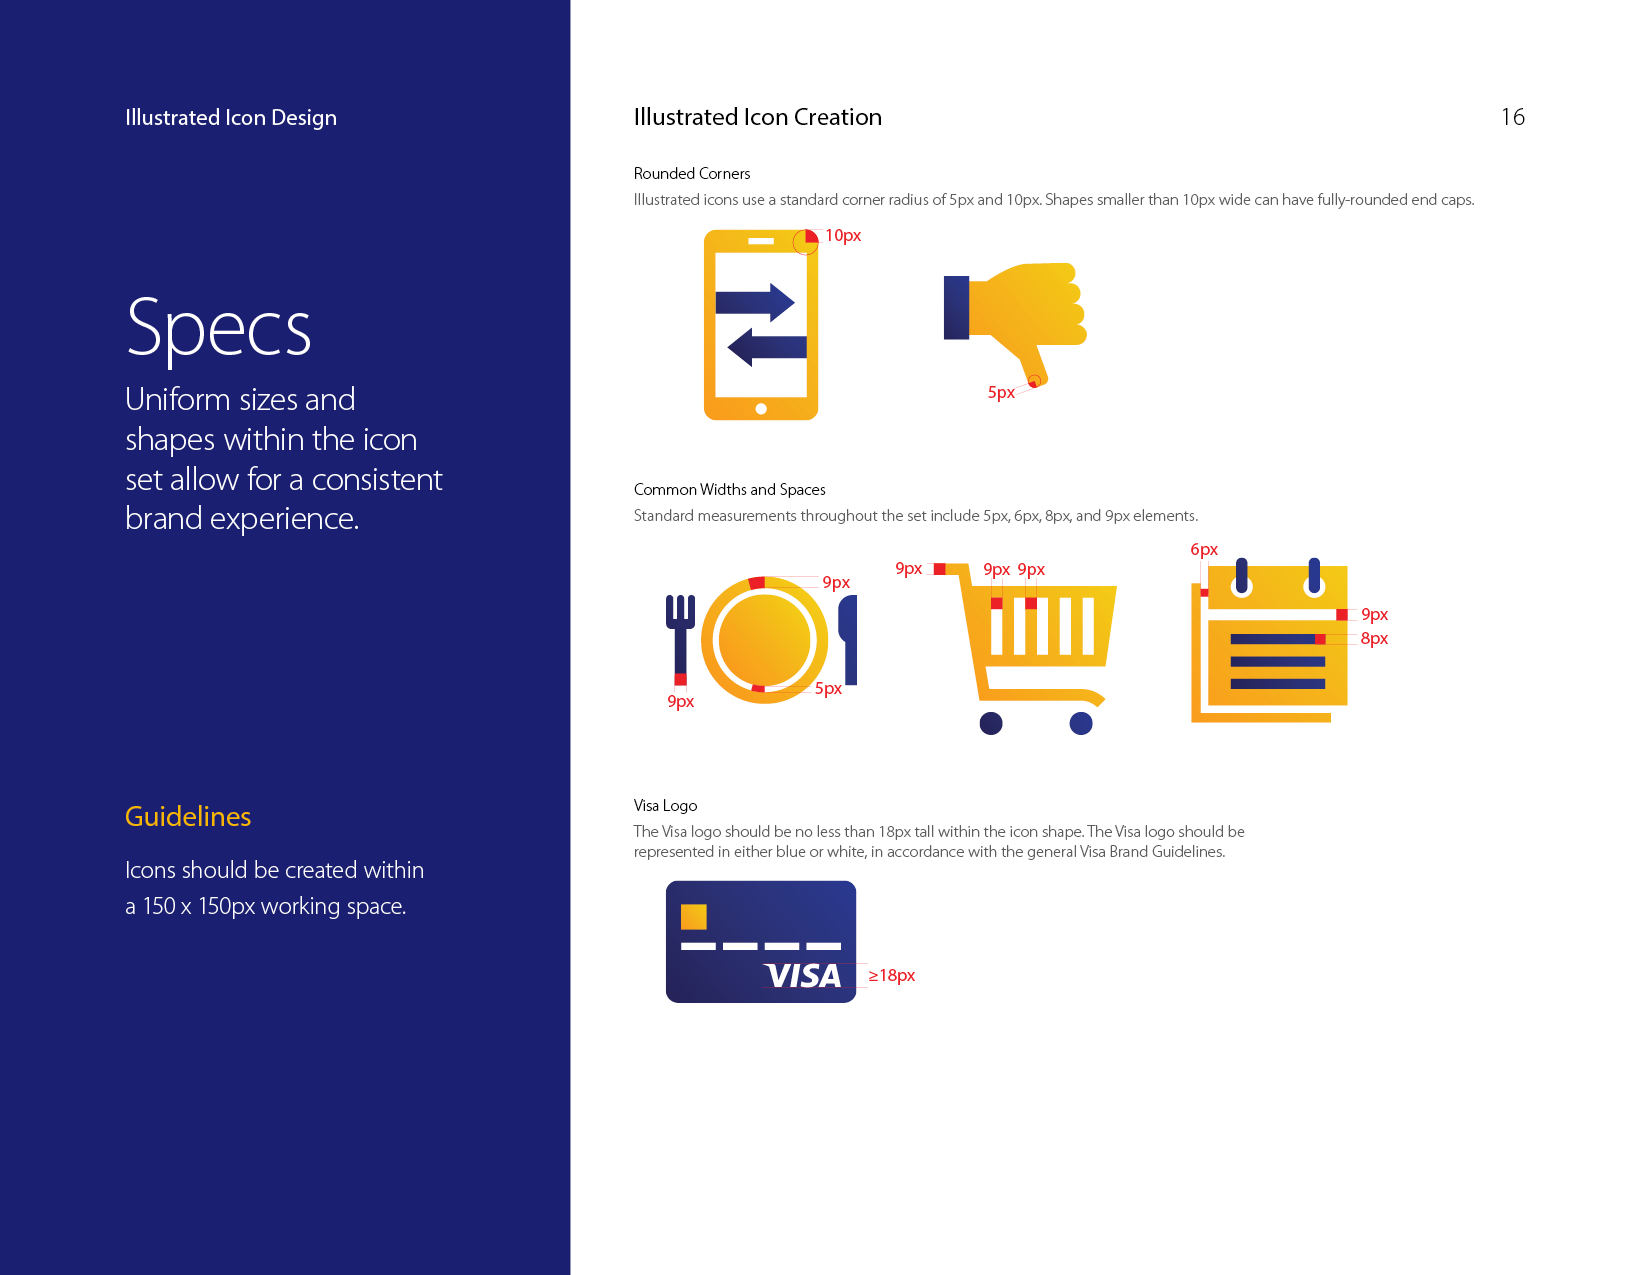 Visa illustrated icons style guide specs